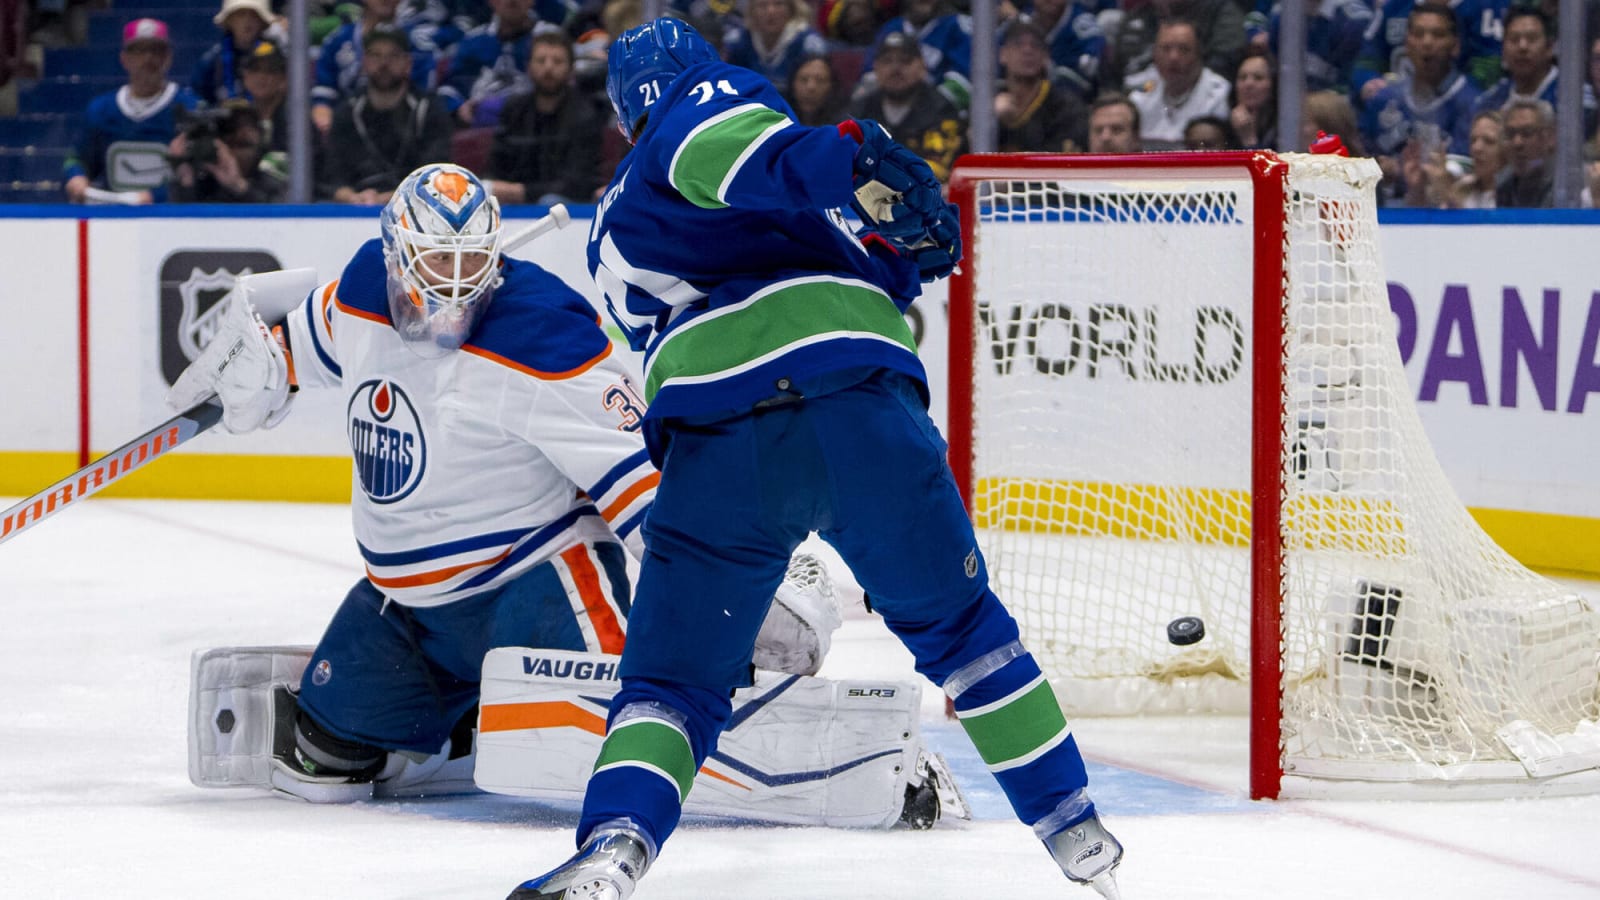 With the Oilers on the brink of elimination, what must they do to win this series?